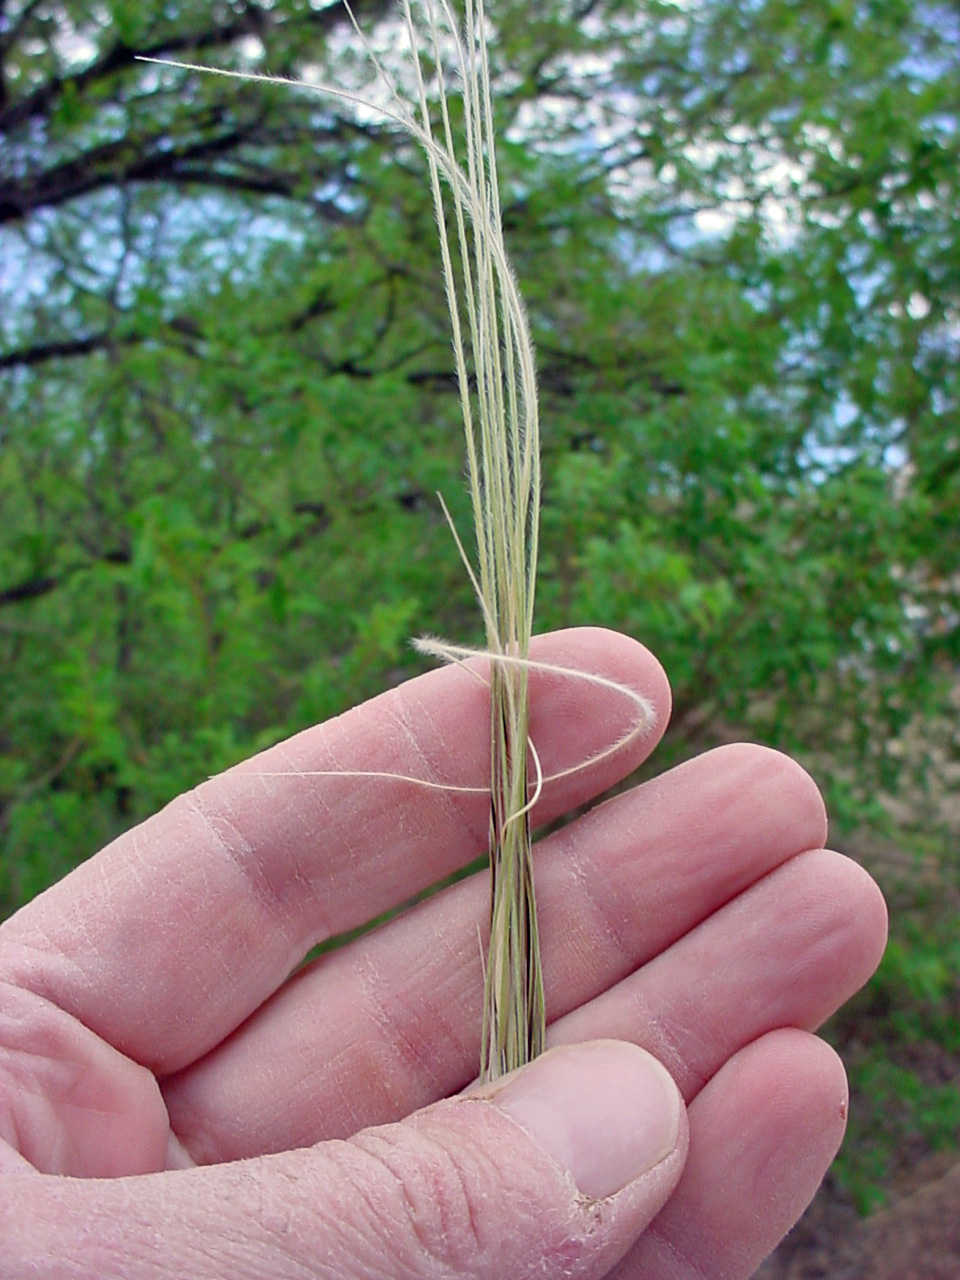 Spikelet with long, plumelike awns